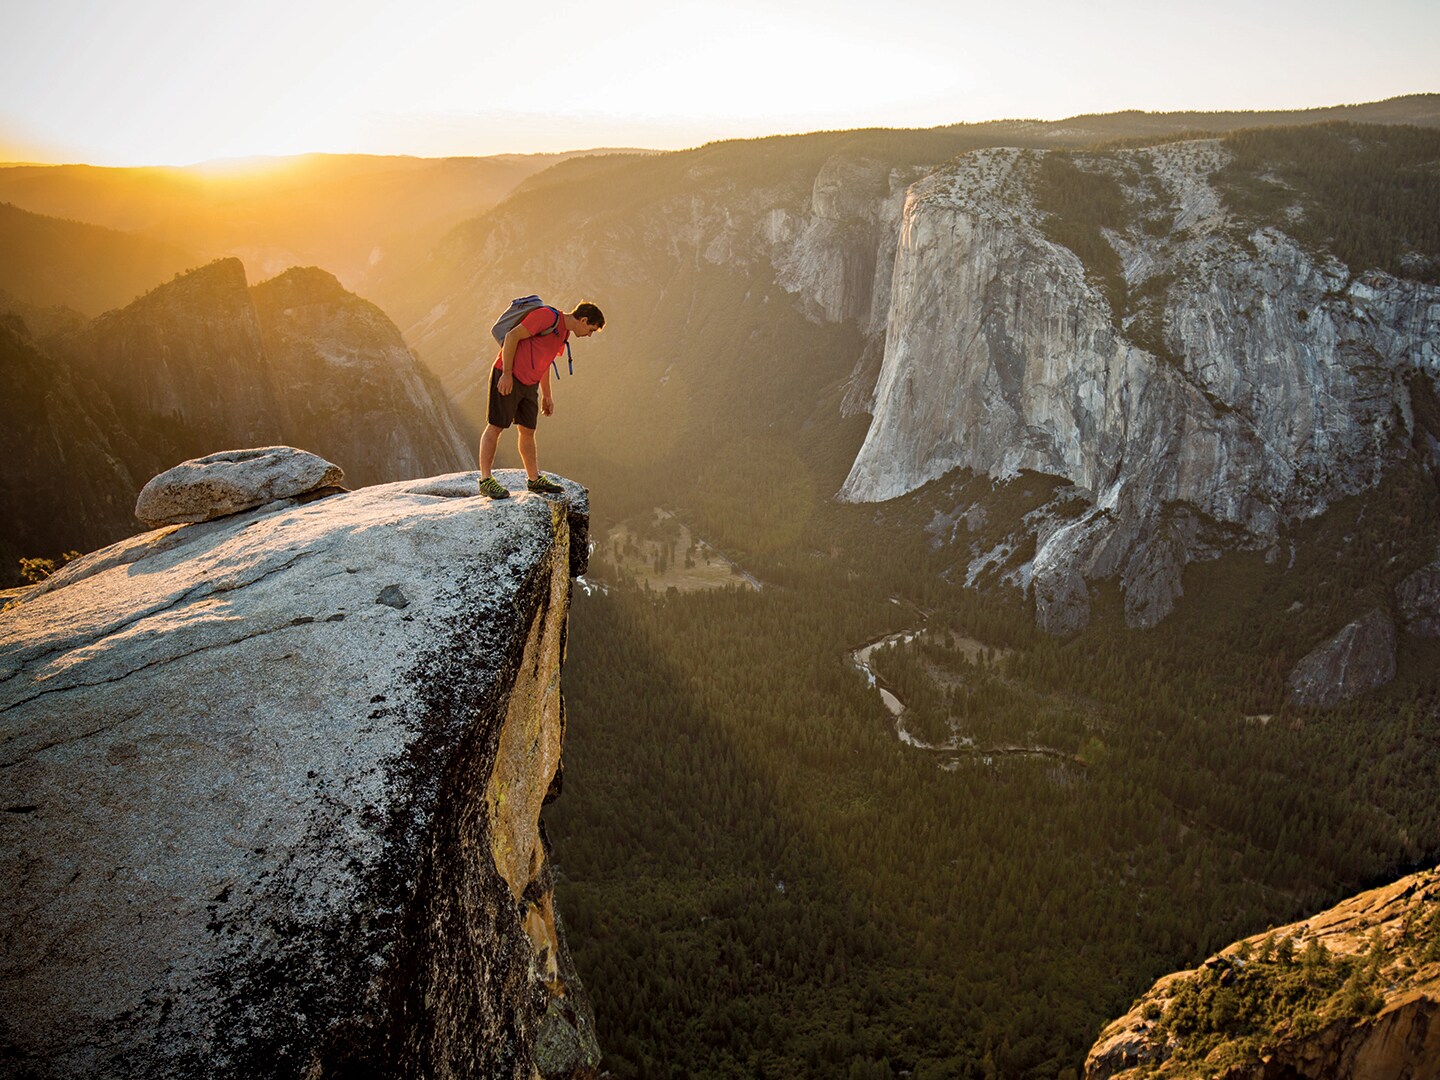 Free Solo National Geographic